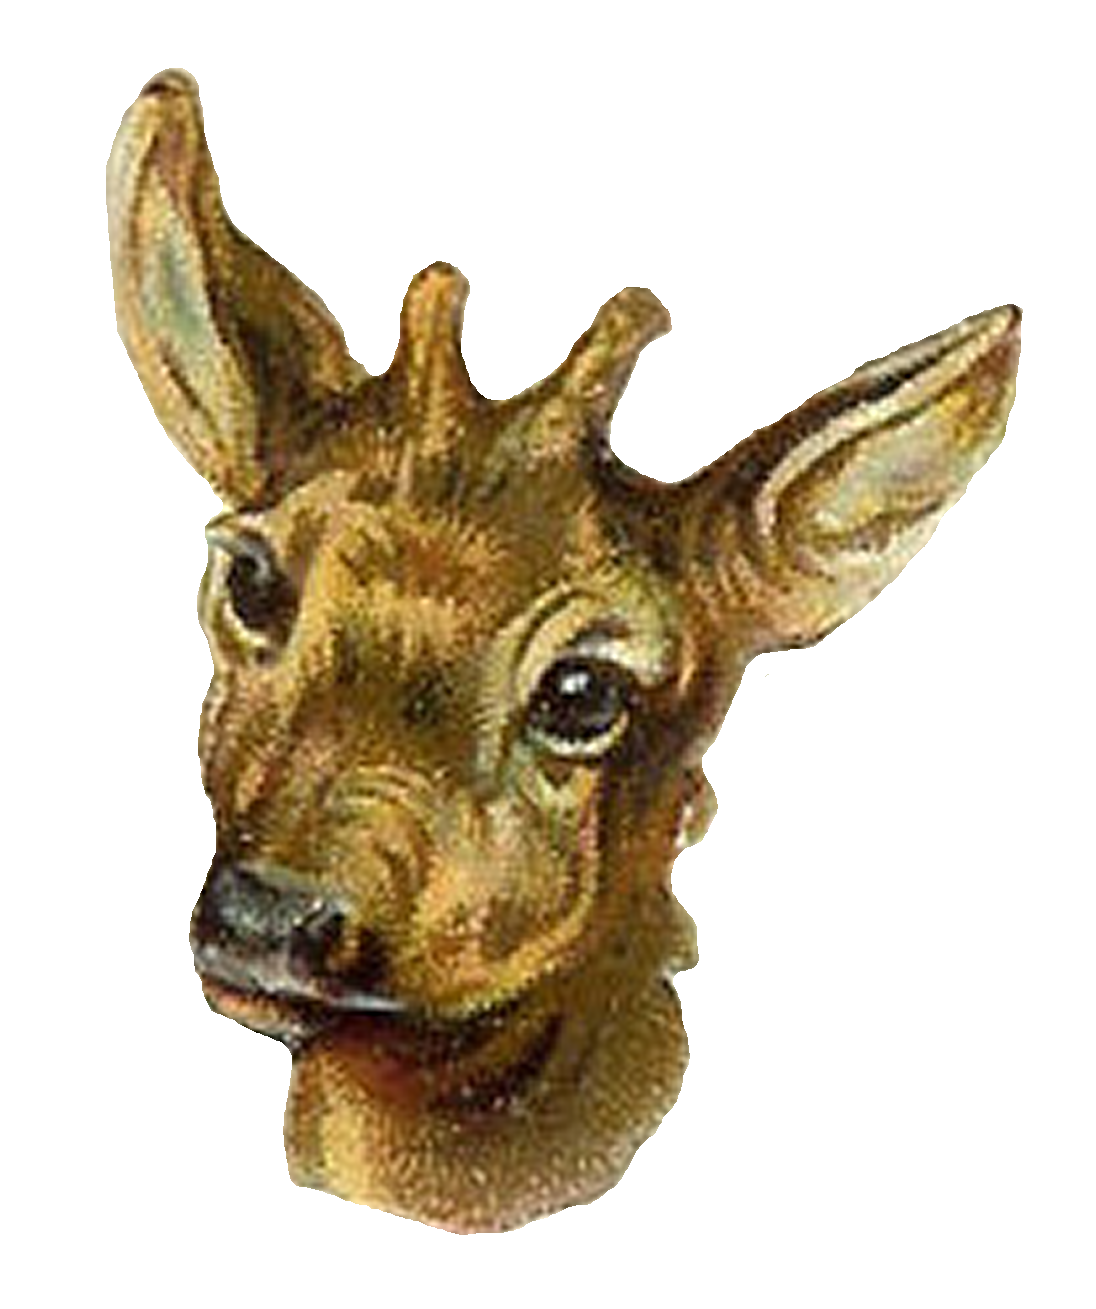 Deer clipart antelope. Antique images stock animal